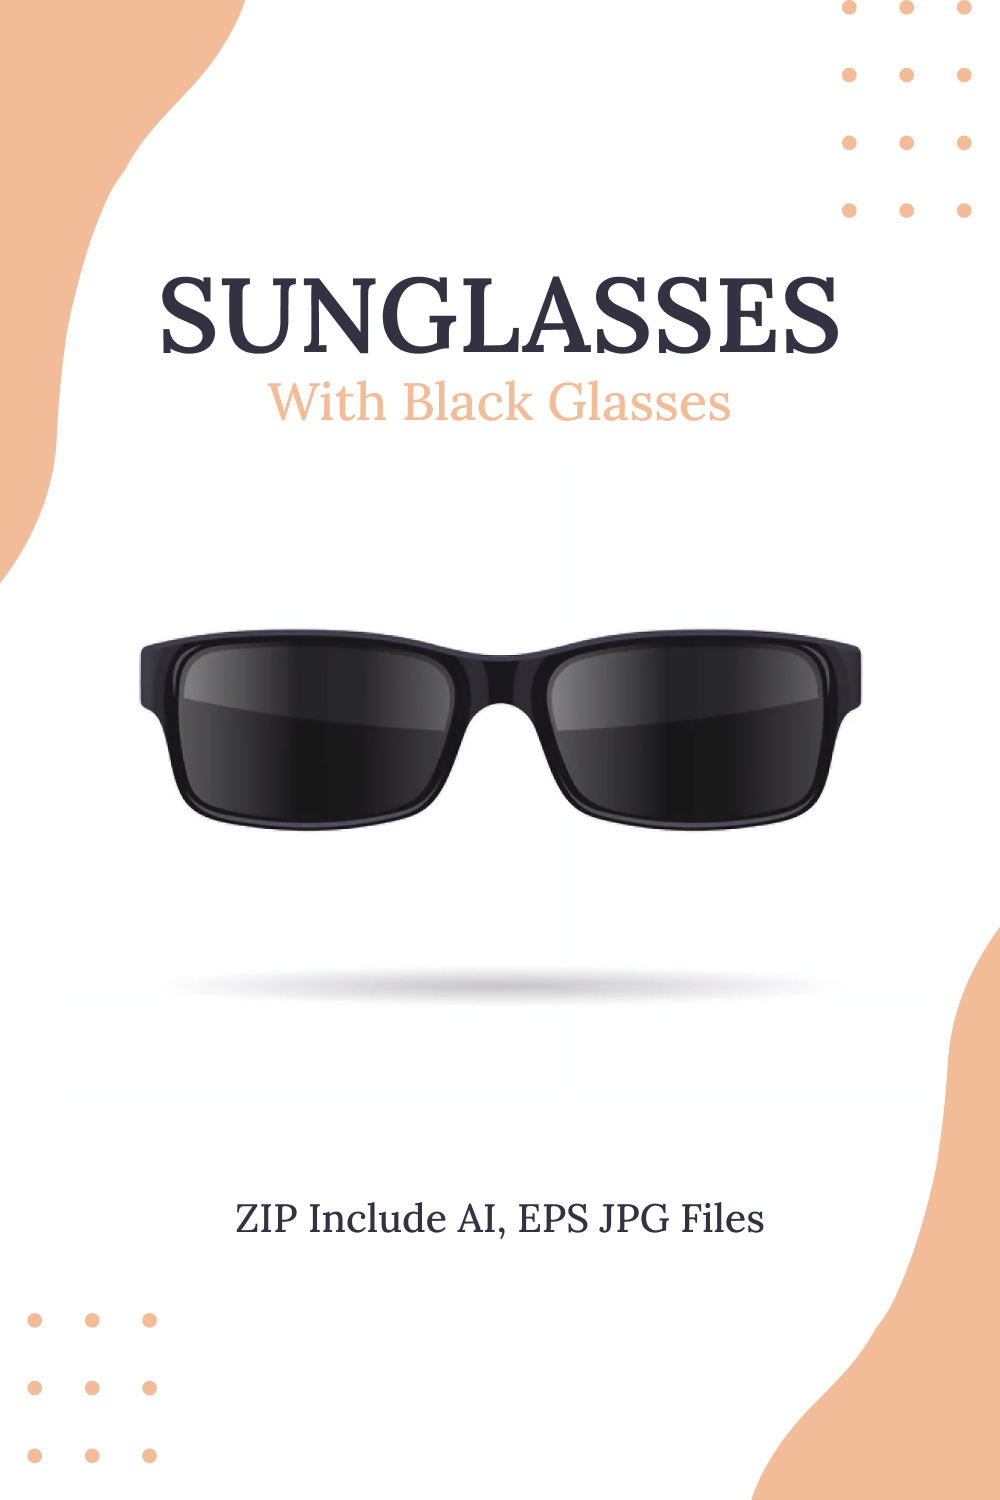 Sunglasses With Black Glasses Pinterest Cover.